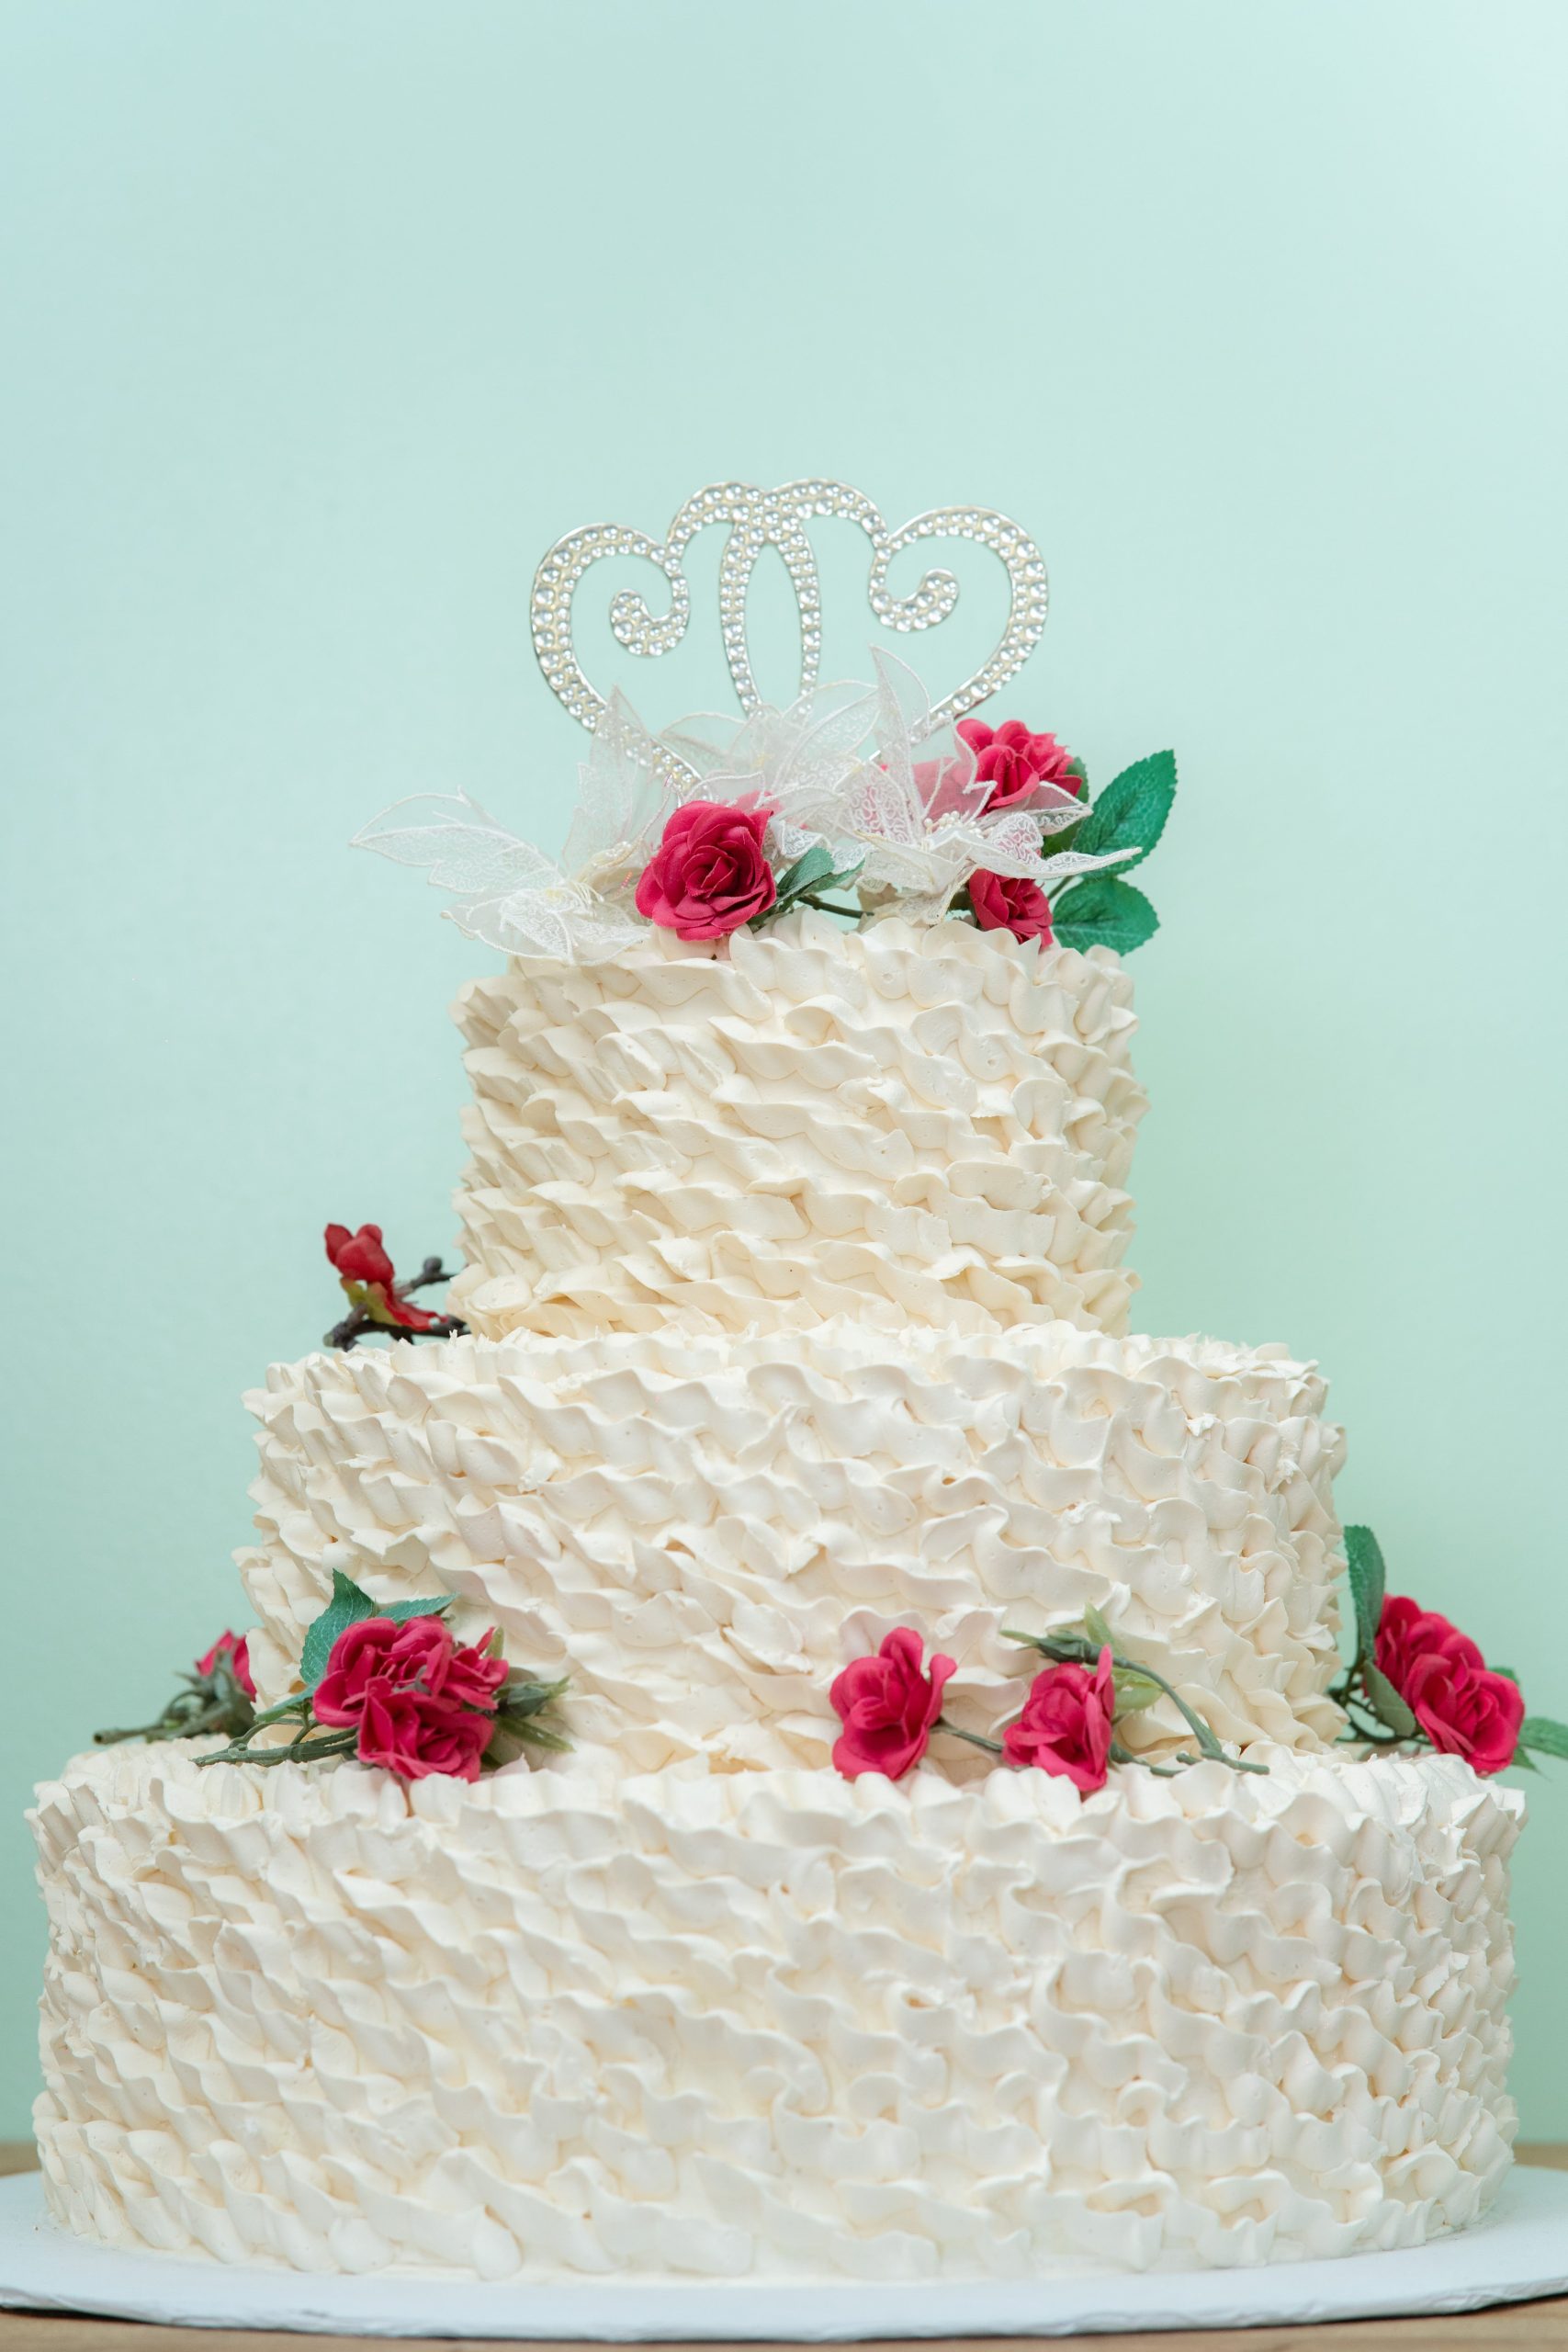 From Rustic to Modern: Our Favorite Wedding Cake Styles